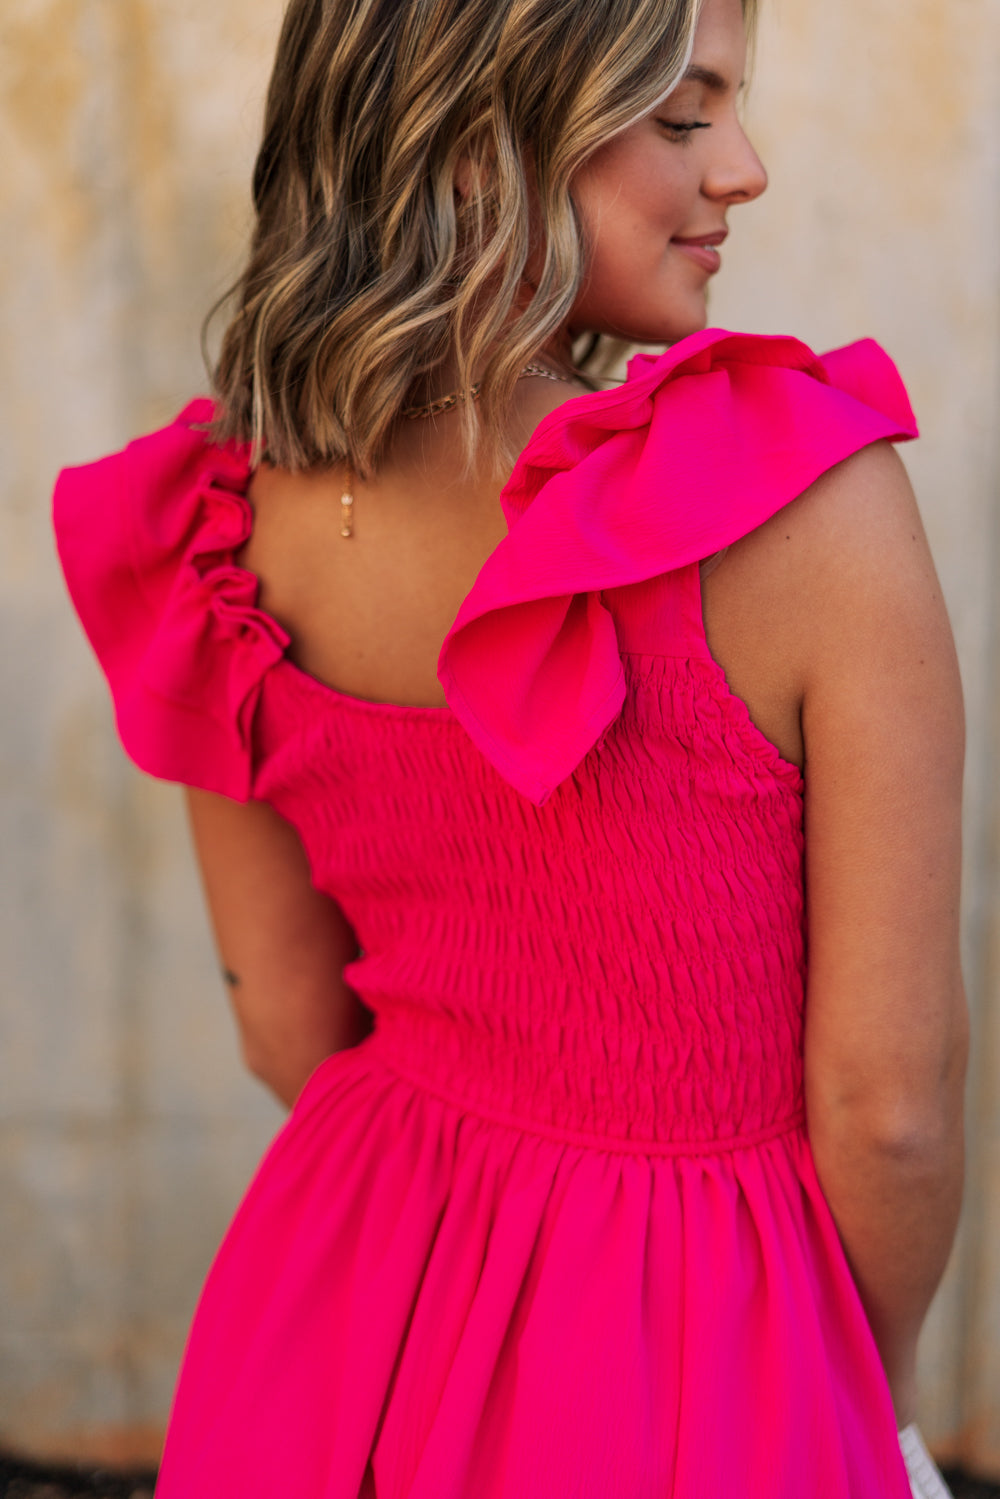 Upper body back view of female model wearing the Kristina Pink Smocked Sleeveless Midi Dress that has hot pink fabric, side slit pockets, midi length, smocked upper, a scoop neckline, and ruffled straps.